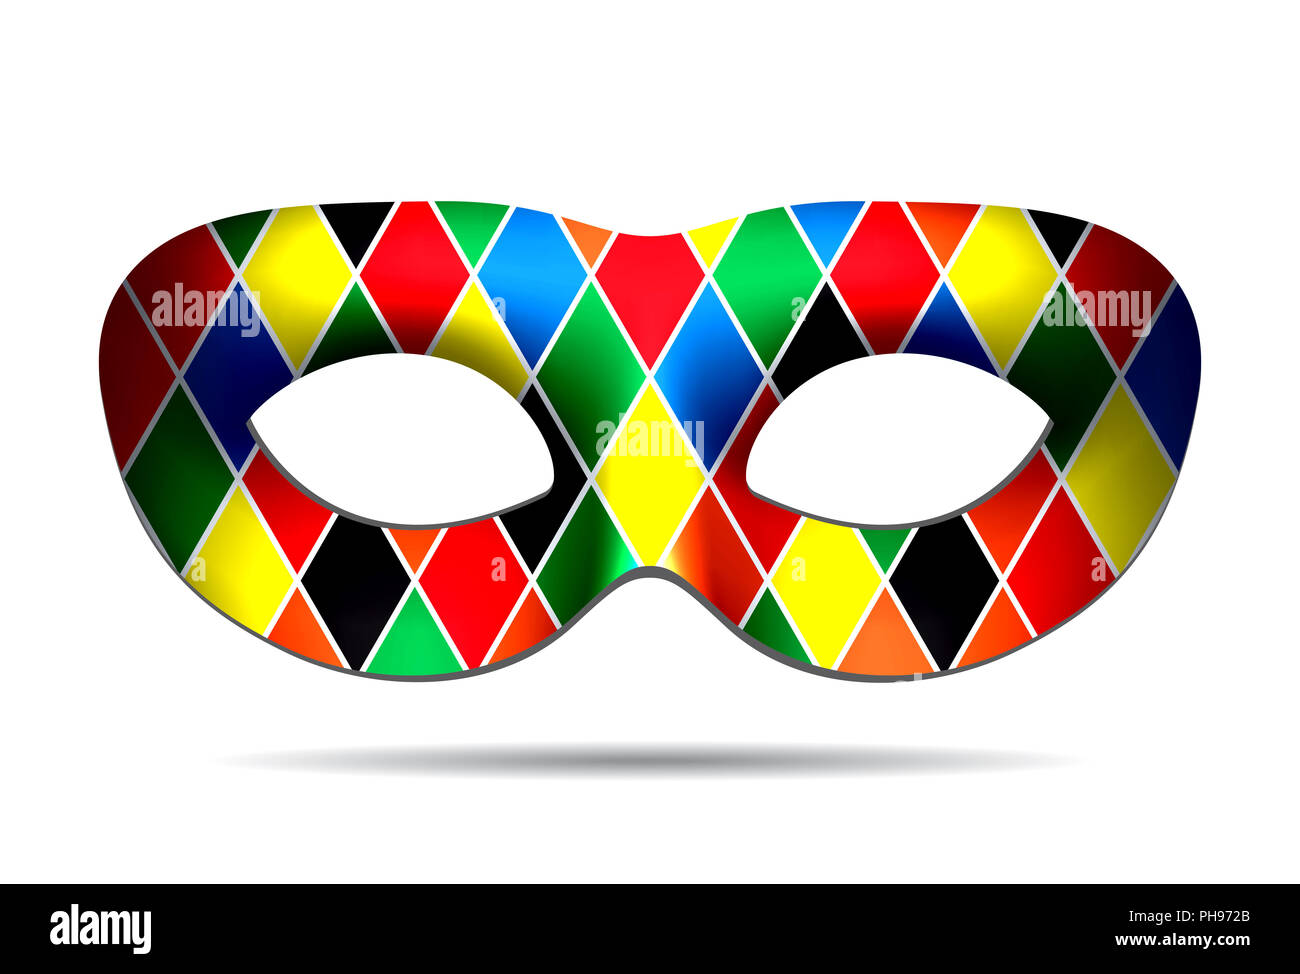 Arlecchino Mask High Resolution Stock Photography and Images - Alamy